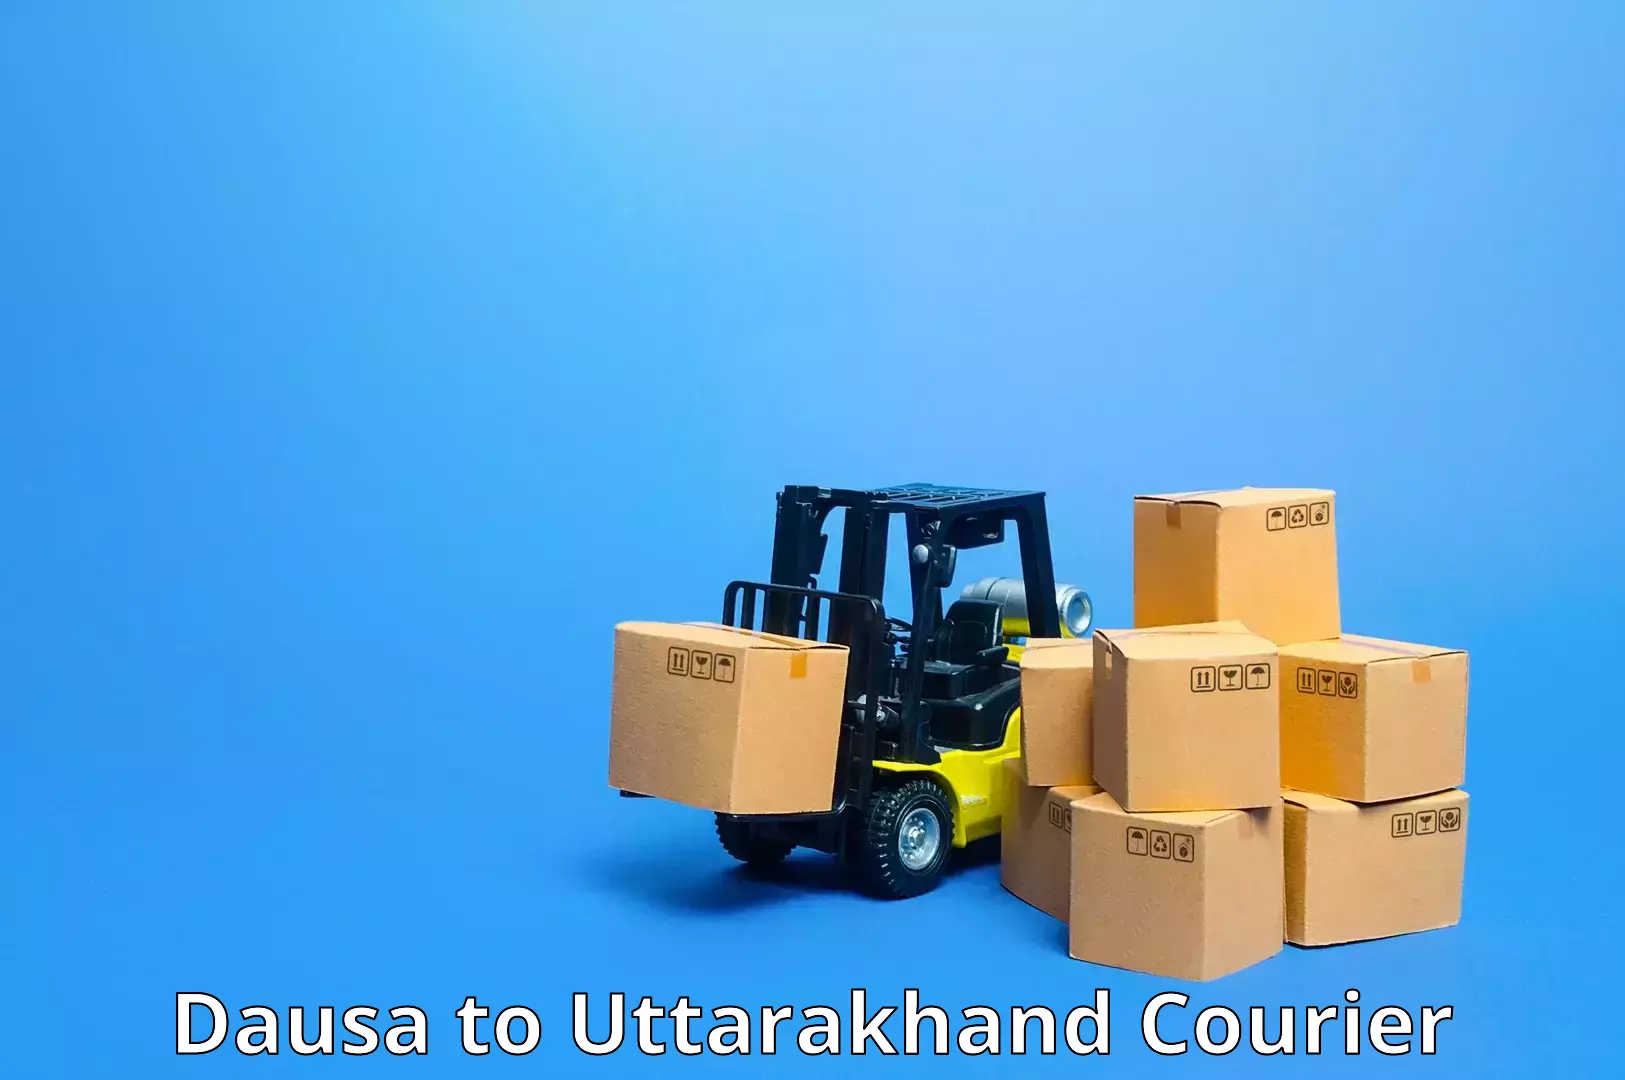 Flexible delivery scheduling in Dausa to Rudraprayag